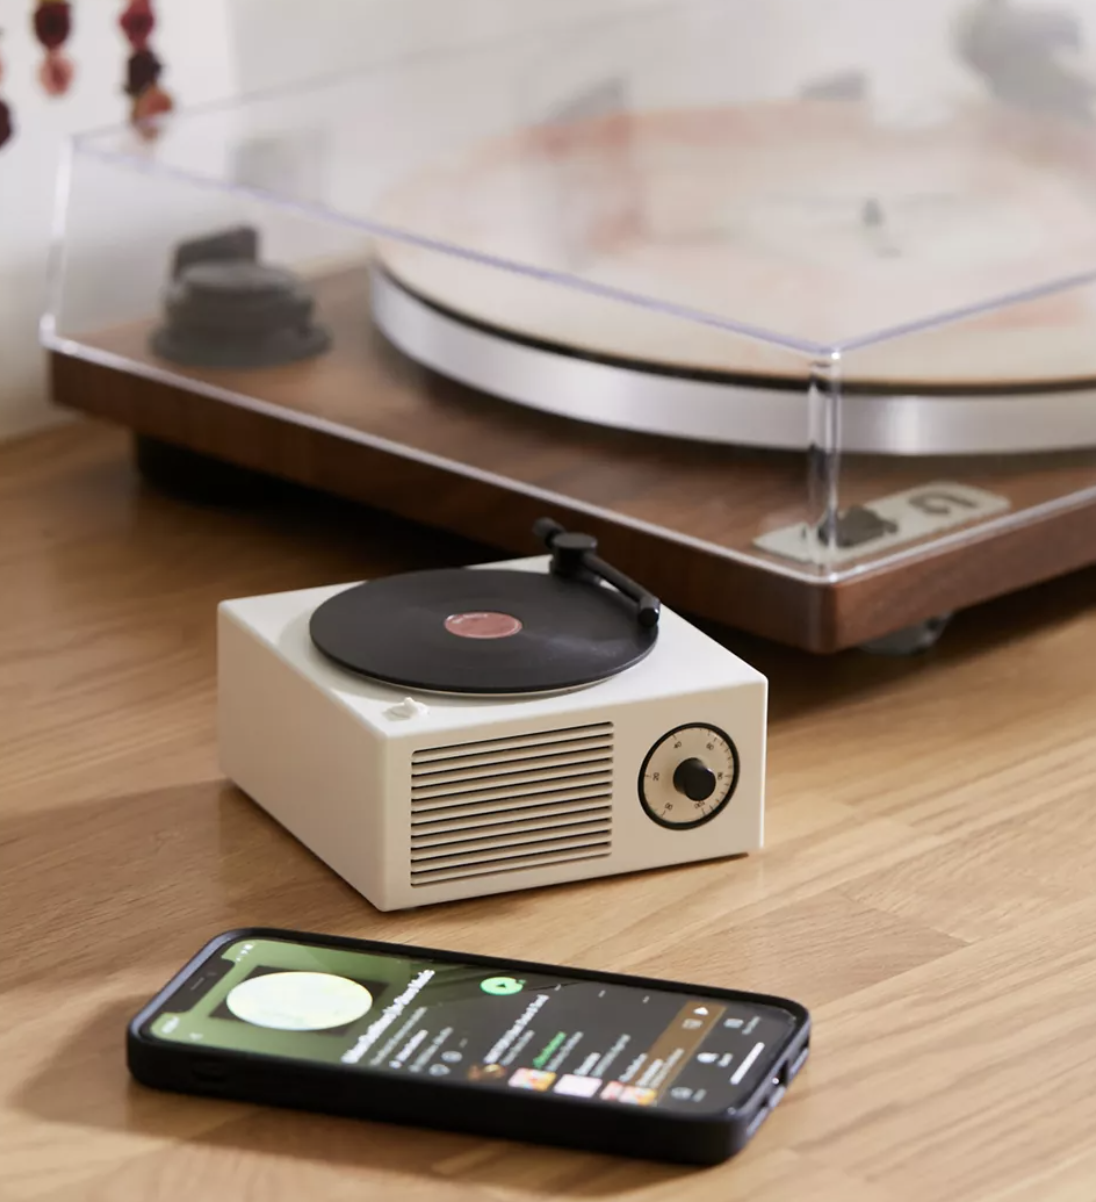 the tiny turntable next to a big turntable and a phone on a table